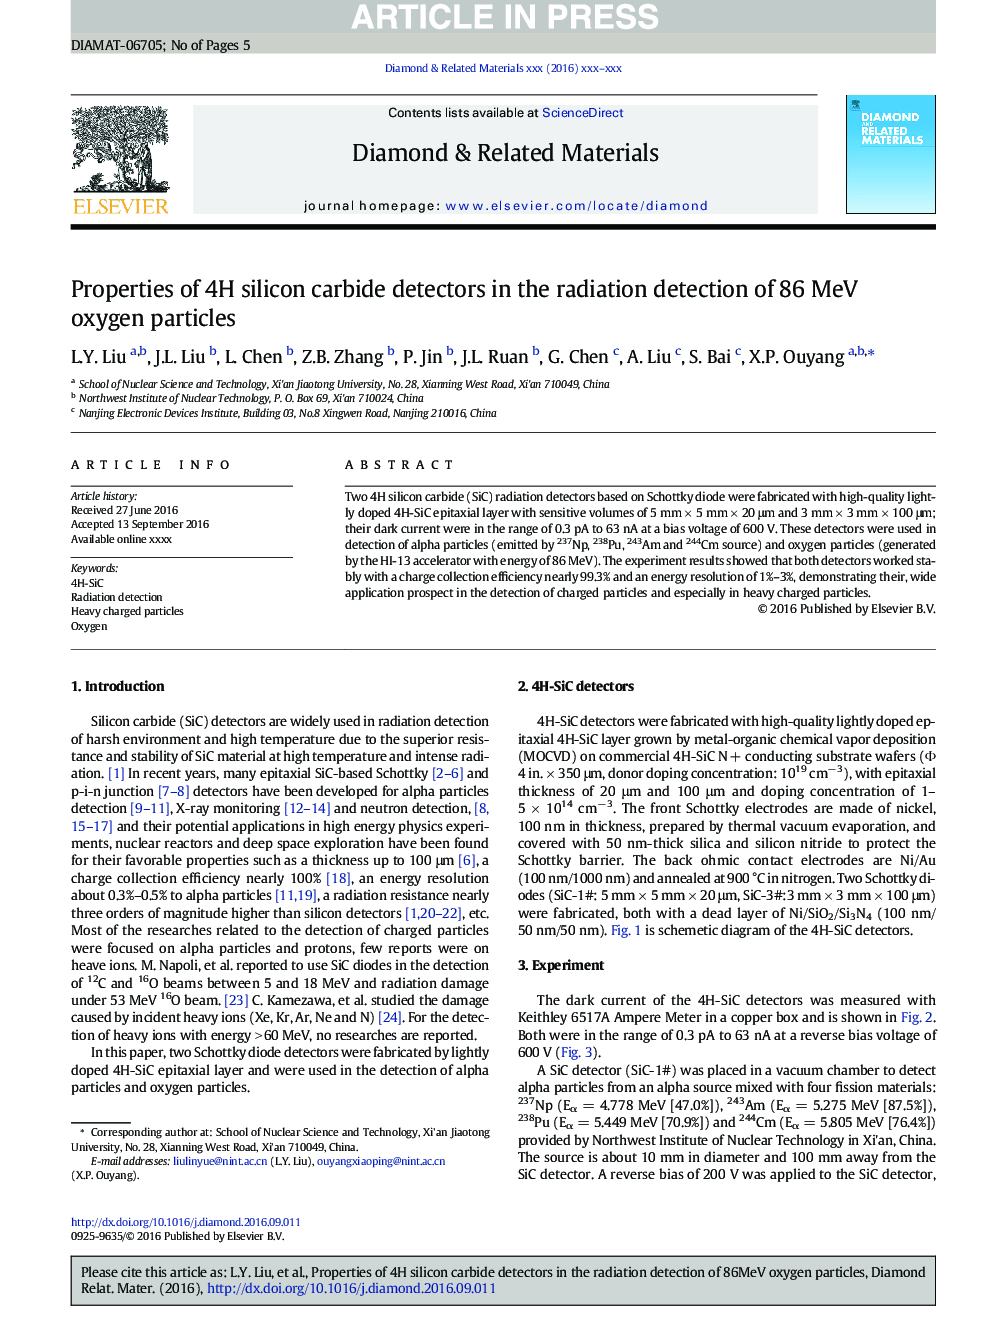 Properties of 4H silicon carbide detectors in the radiation detection of 86Â MeV oxygen particles